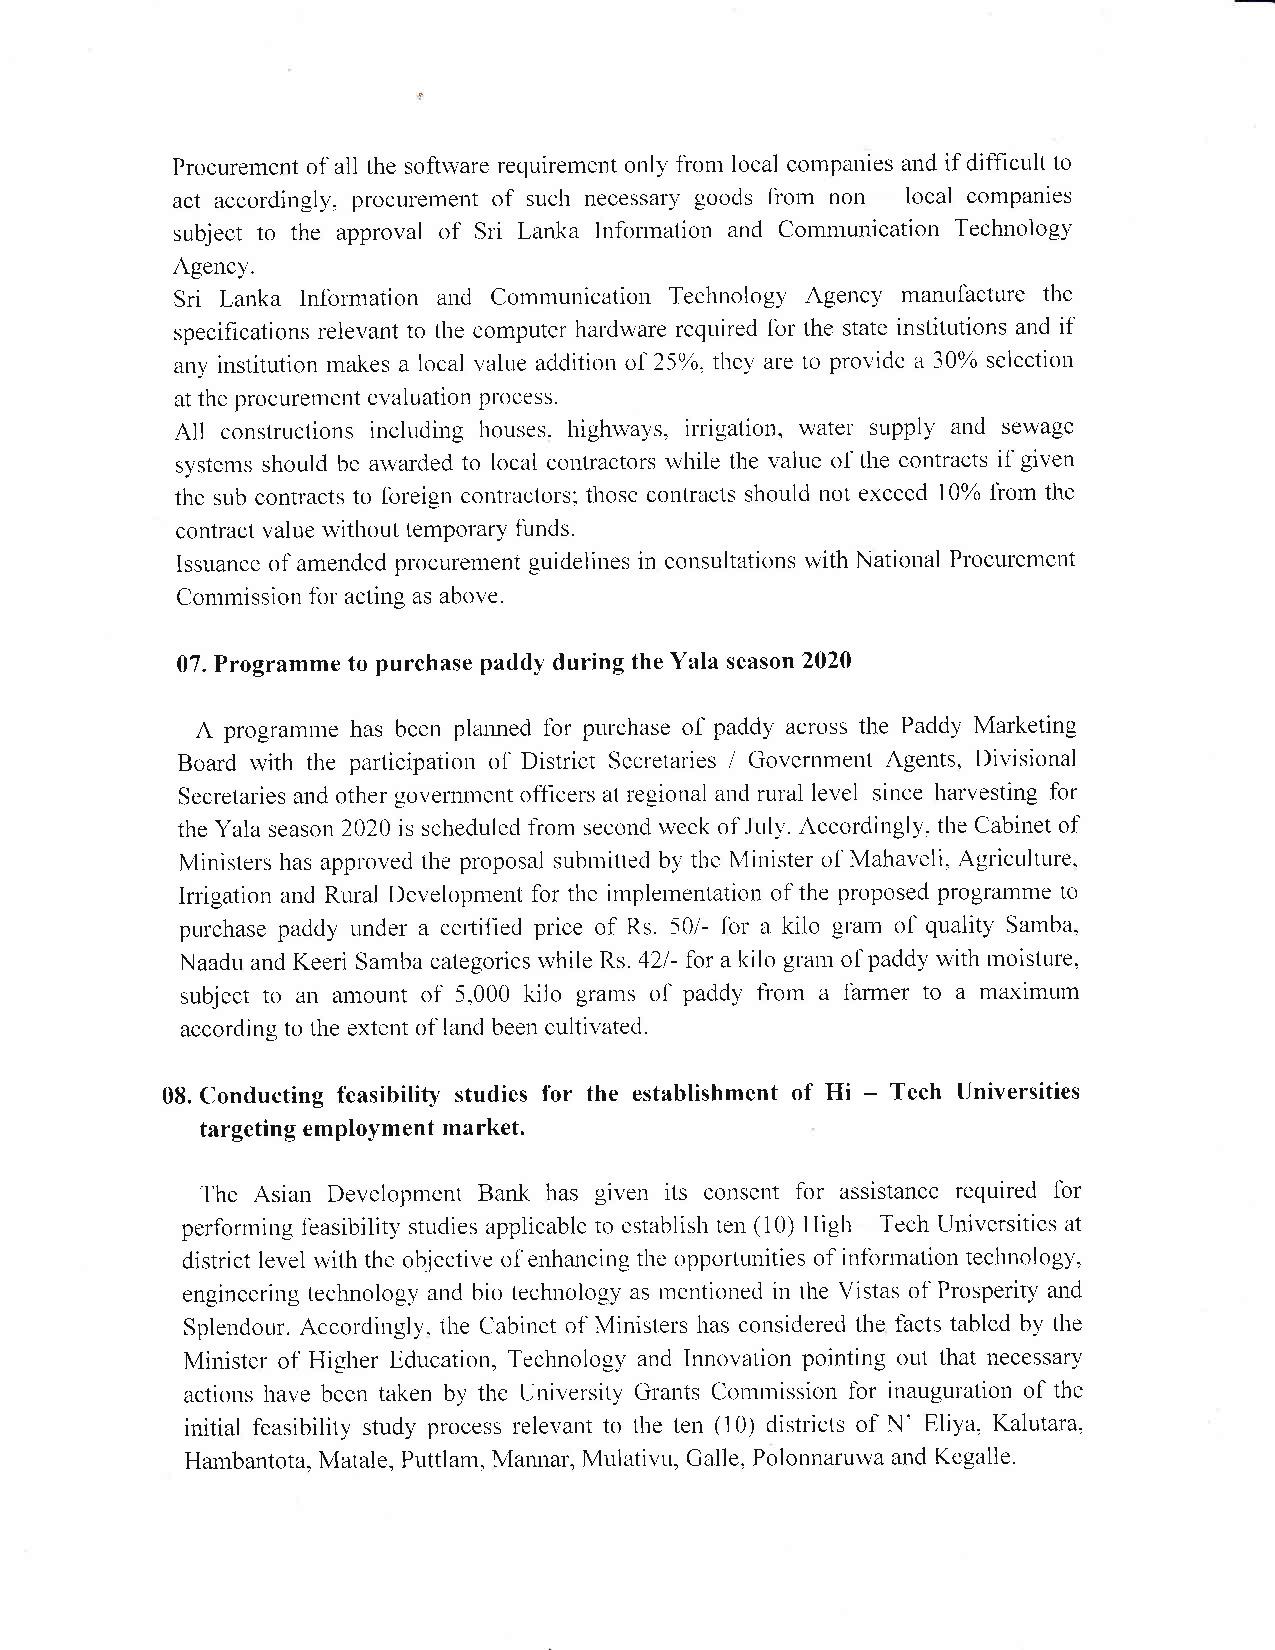 Cabinet Decision on 15.07.2020 English page 003